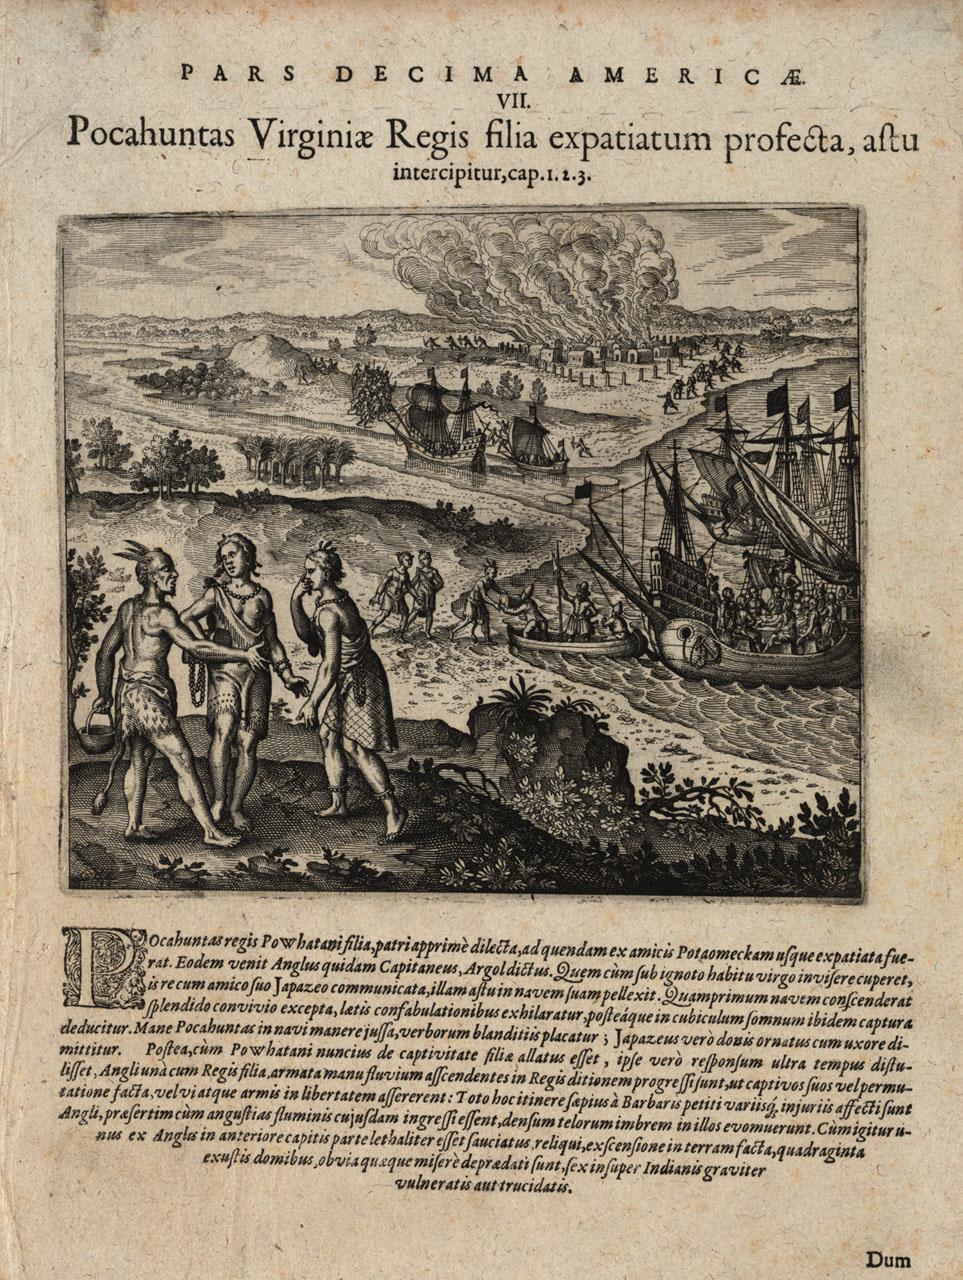 Plate VII from the tenth part of the America e-series, 1619